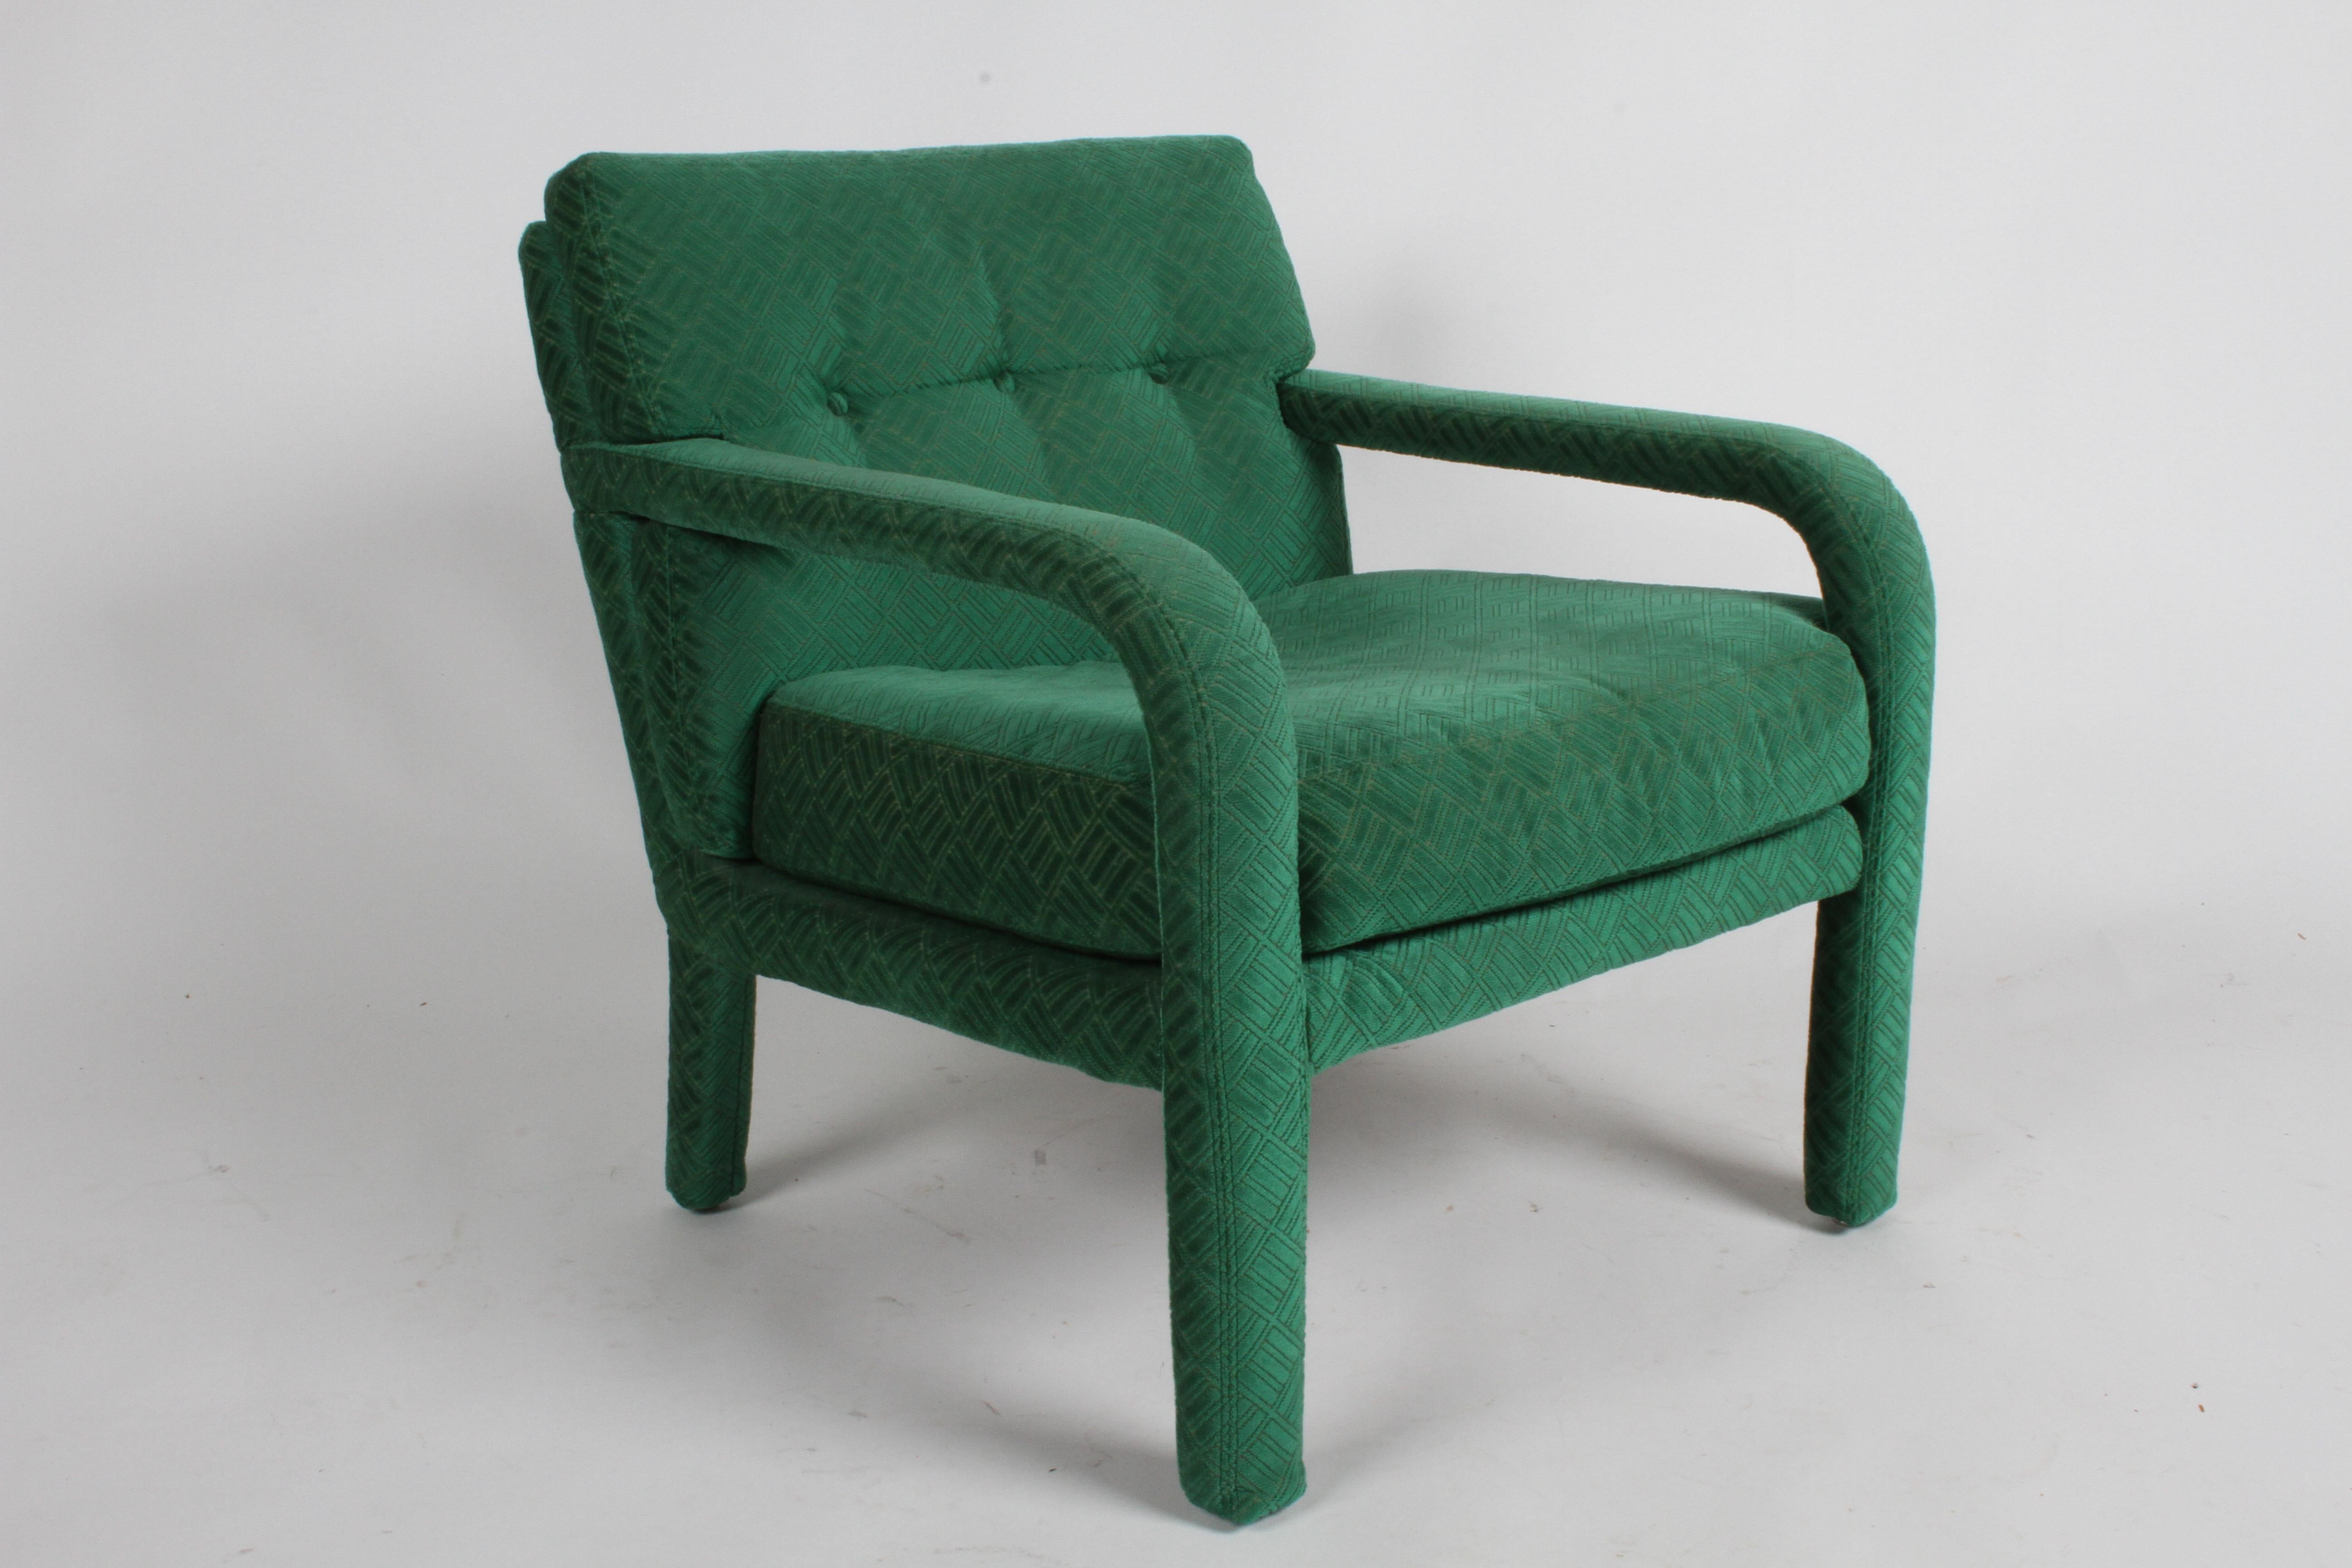 American Pair of 1970s Directional Lounge Chairs in a Textured Emerald Green Upholstery